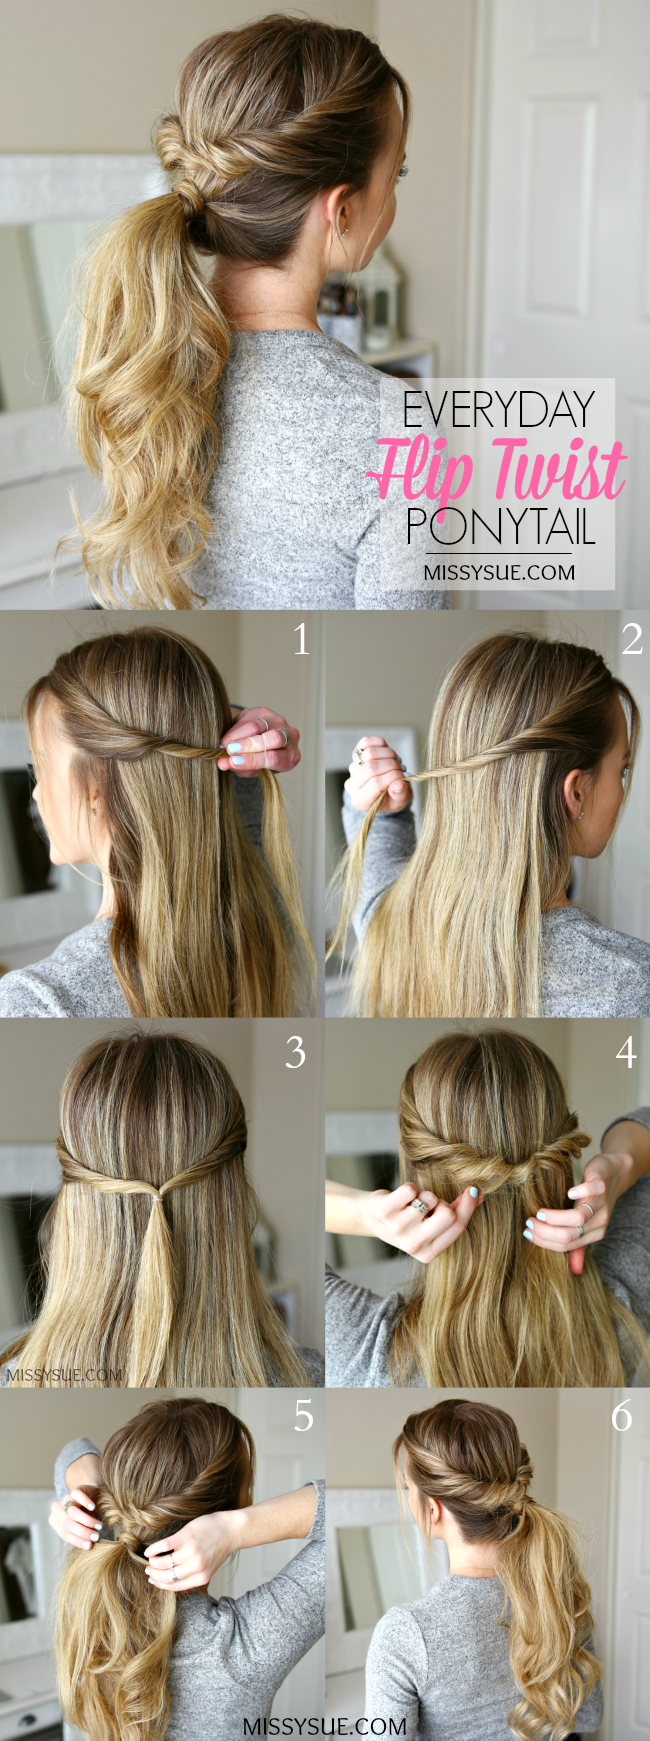 15 quick hairstyles ideas